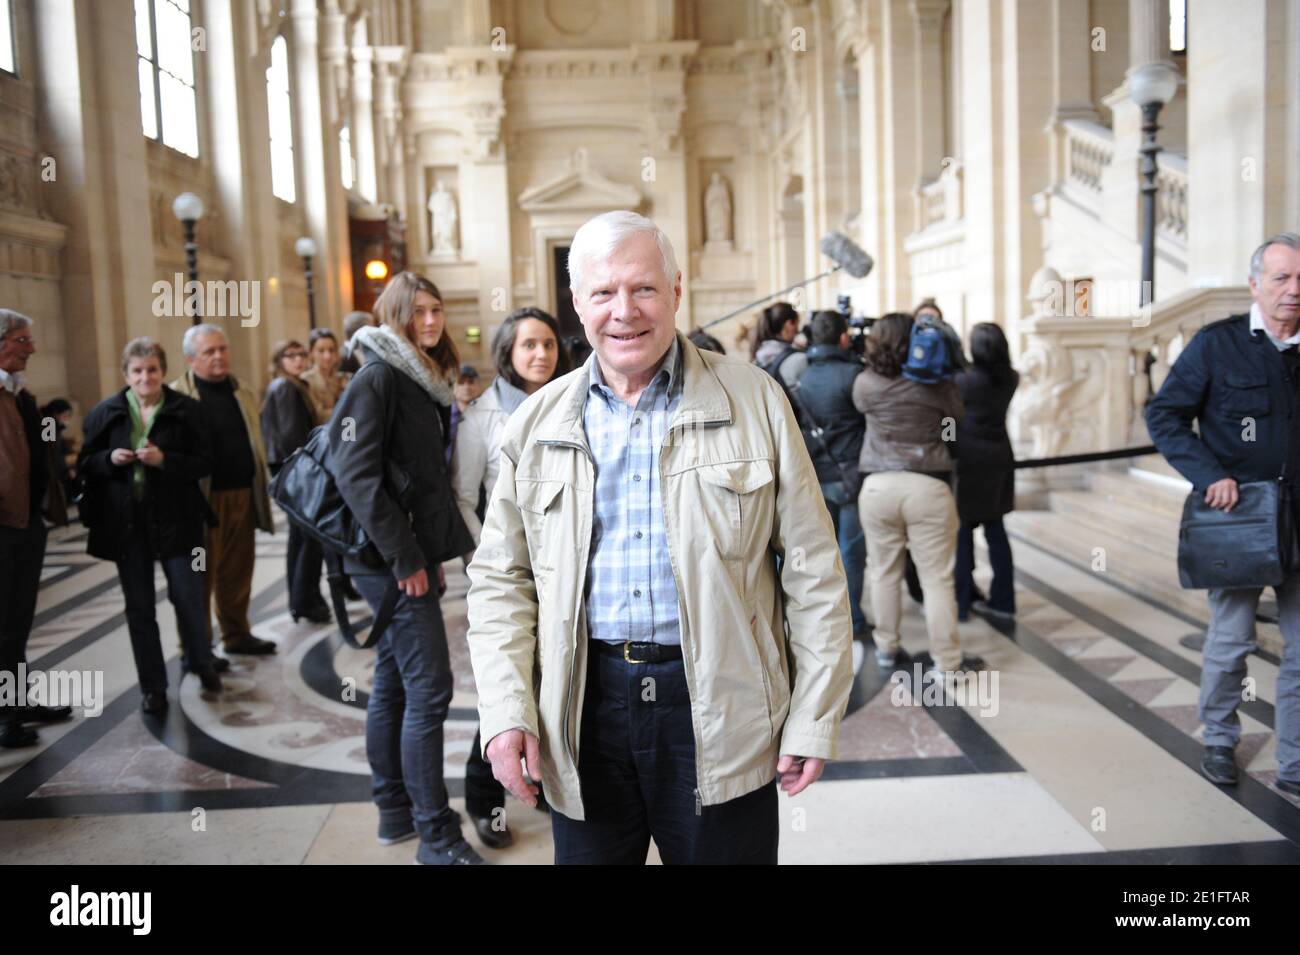 Frenchman Andre Bamberski leaving the Palais de Justice where he attended the second day of German cardiologist Dieter Krombach's trial for the murder of Kalinka Bamberski, in Paris, France on March 30, 2011. The French court today decided to continue the trial of the German doctor, who is accused of having raped and killed his then 14-year-old stepdaughter, Kalinka Bamberski, in the summer of 1982 while she was holidaying with her mother at Krombach's home at Lake Constance, southern Germany. A court in Germany ruled that Krombach could not be held responsible for the death, but in 1995 a cou Stock Photo